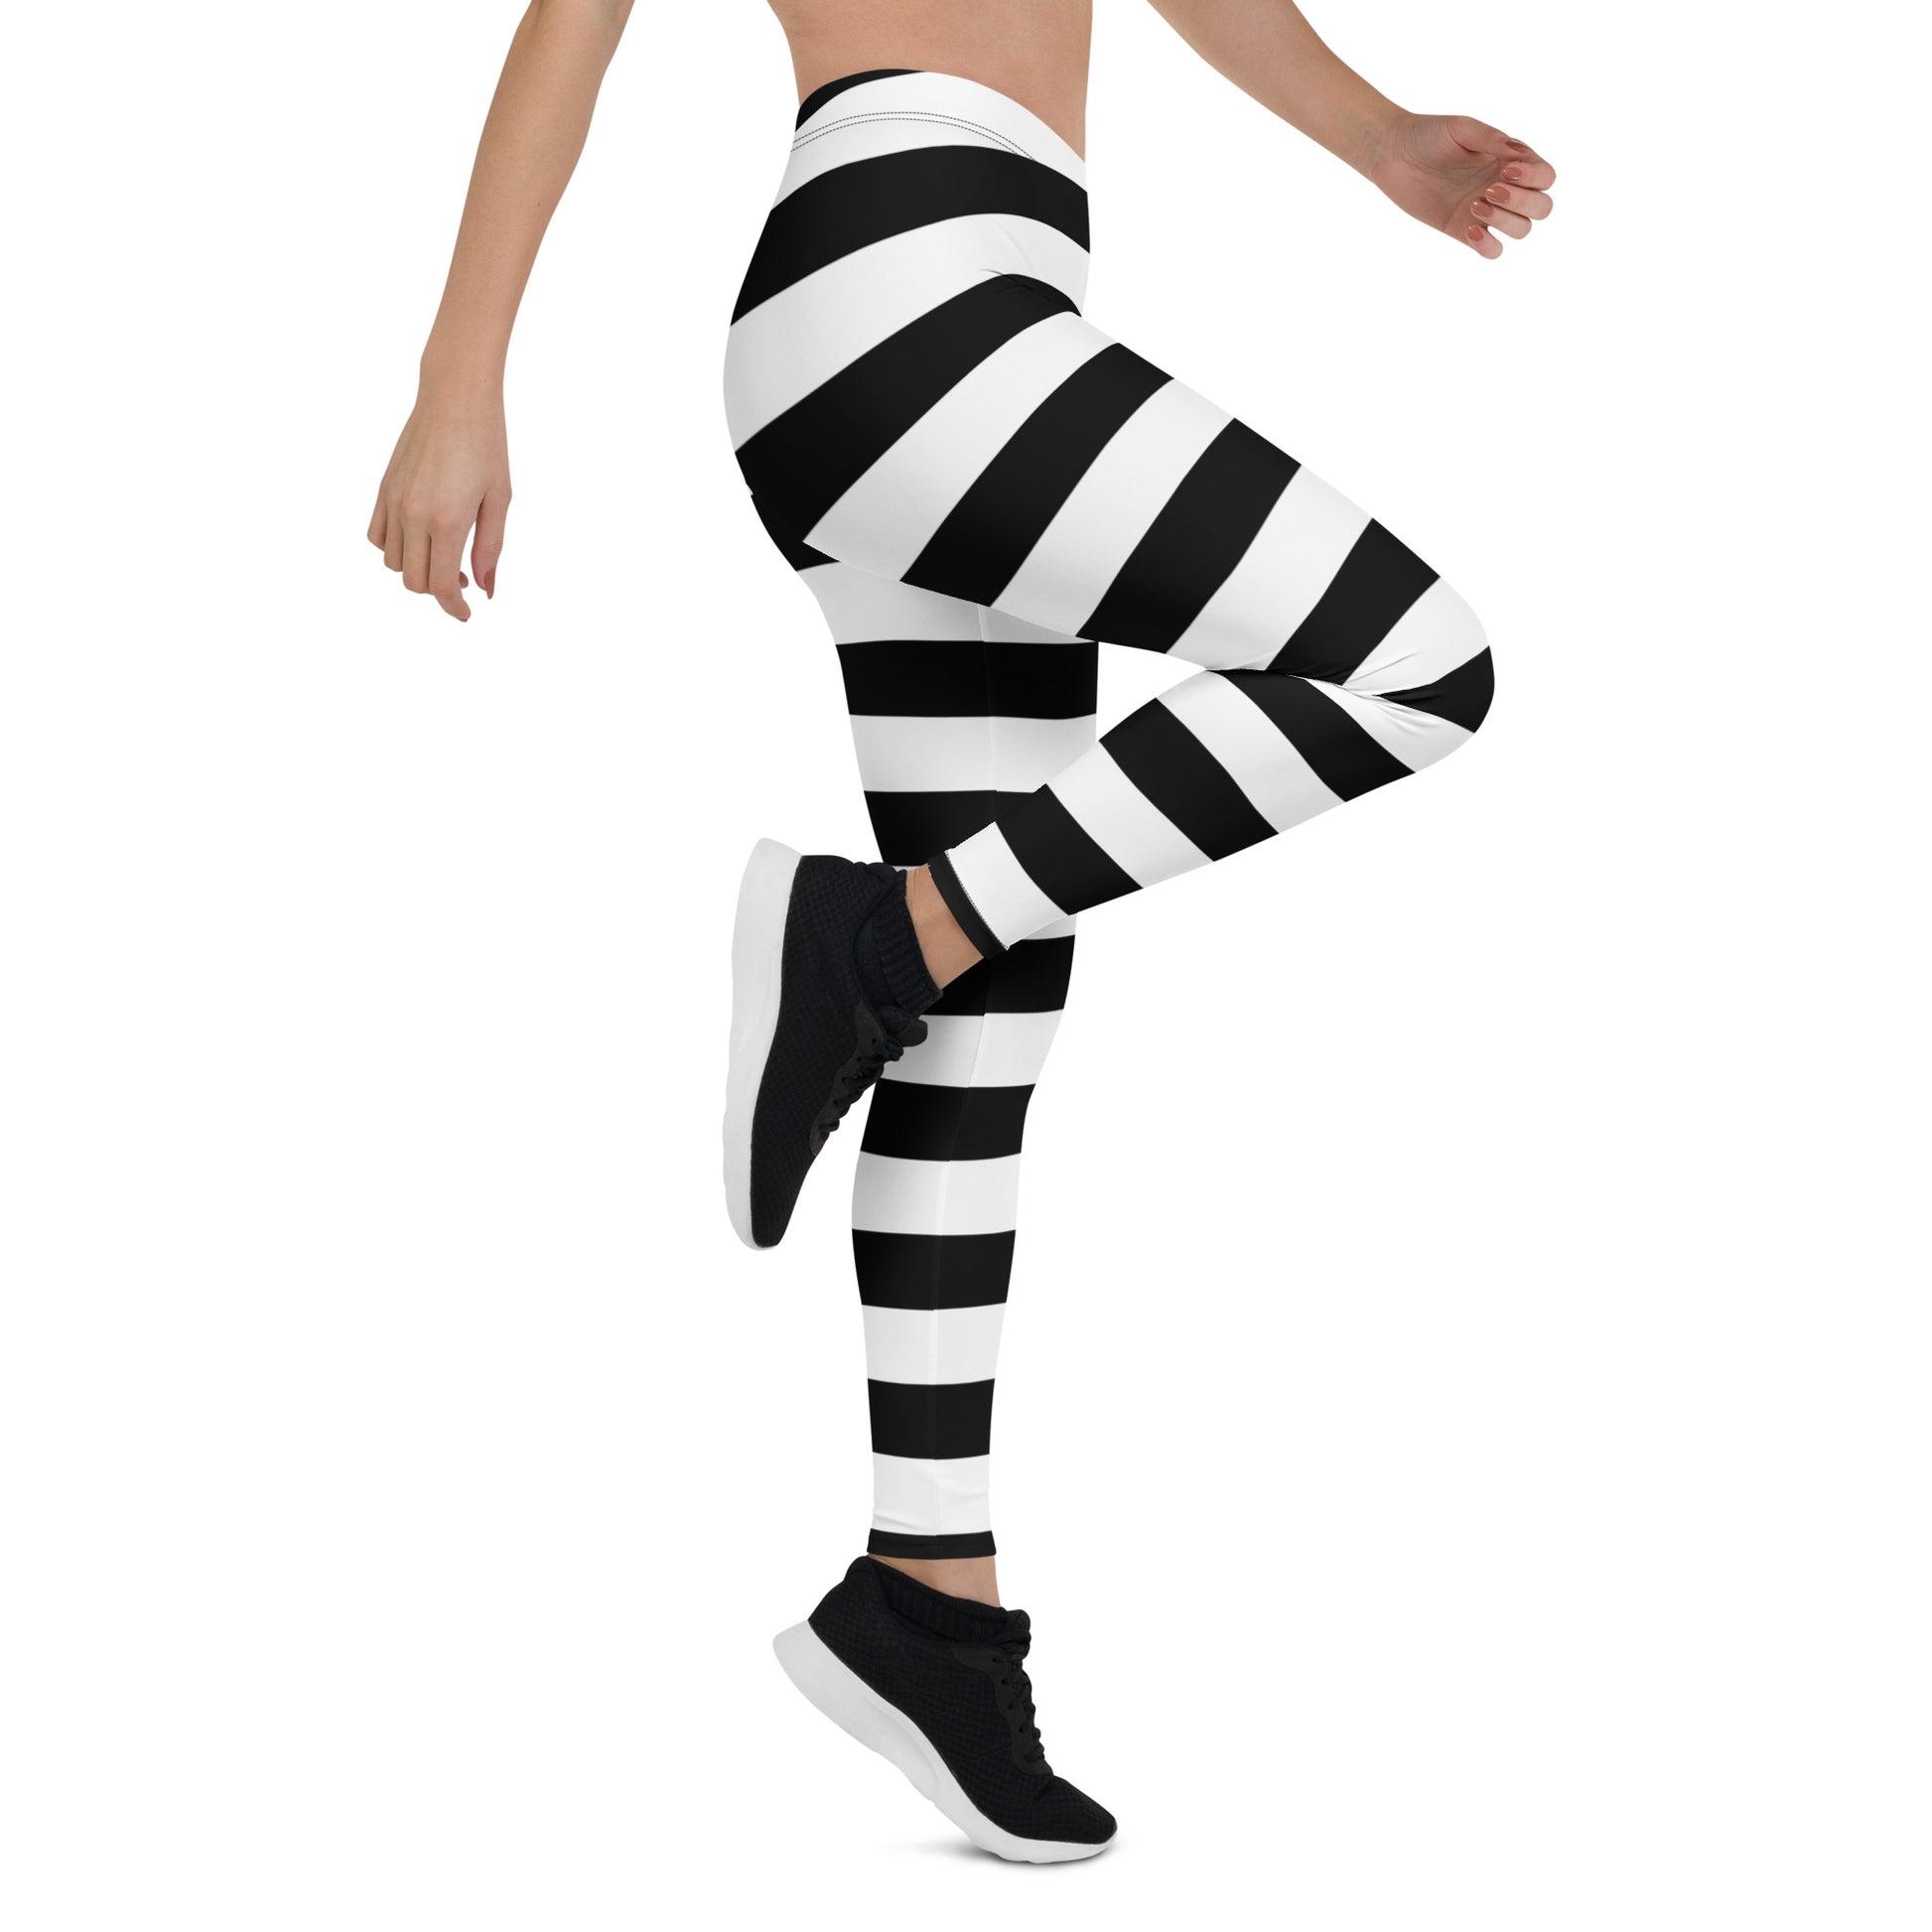  Black and White Striped Pants for Women: Halloween